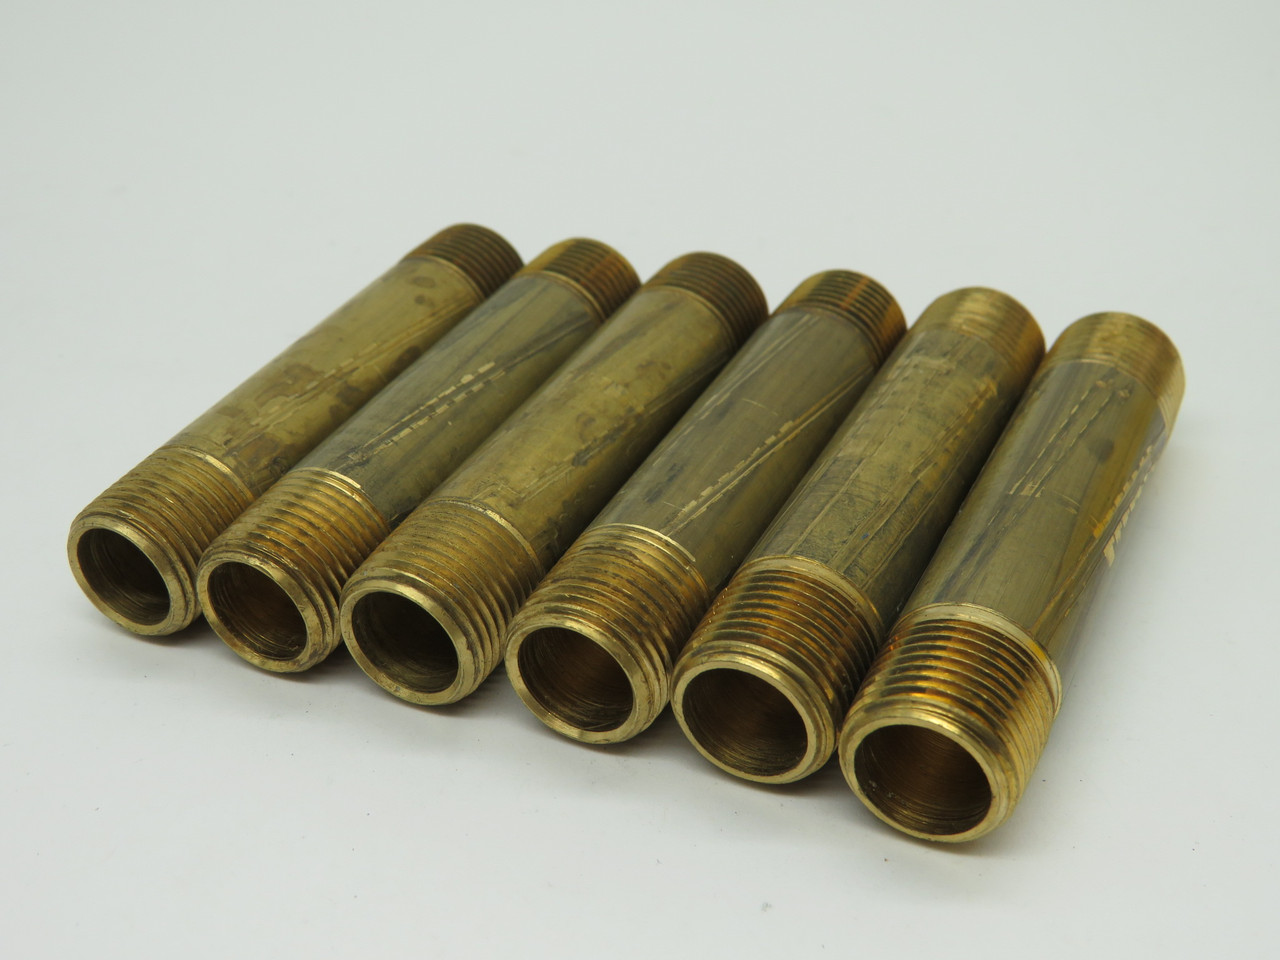 Generic Brass Pipe Nipple 3/8" Male NPT 3" Length Lot of 6 USED